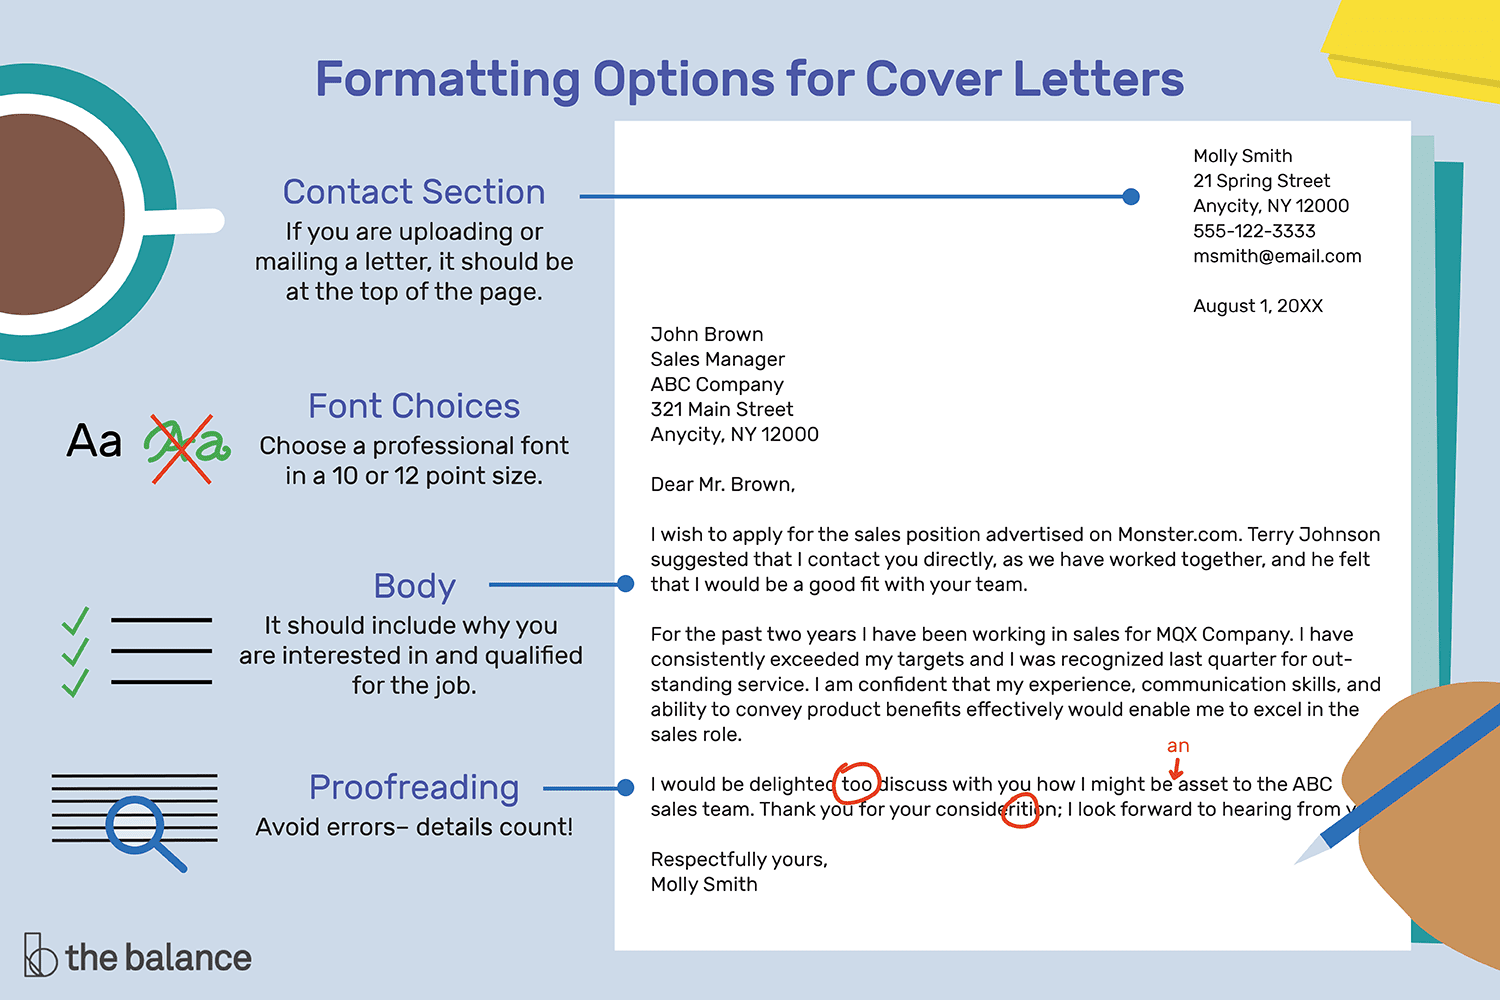 Formatting options for cover letter